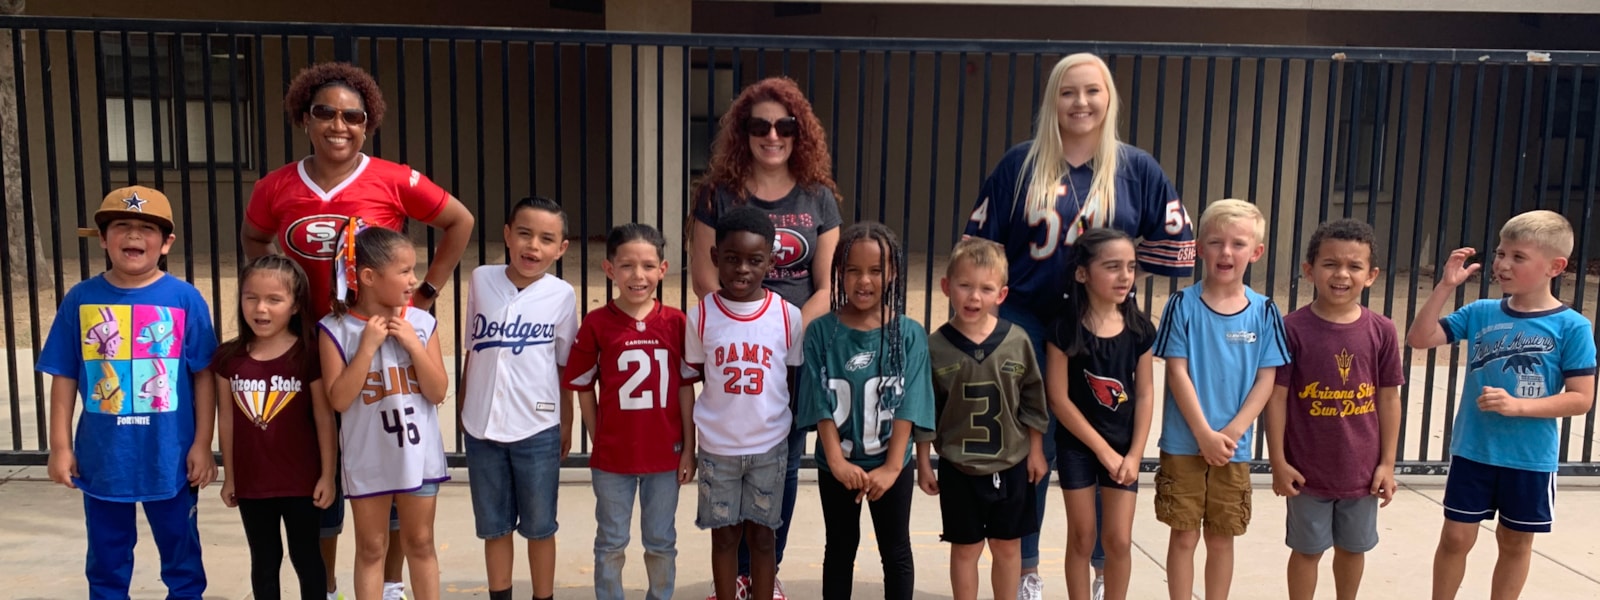 students and staff wearing jerseys